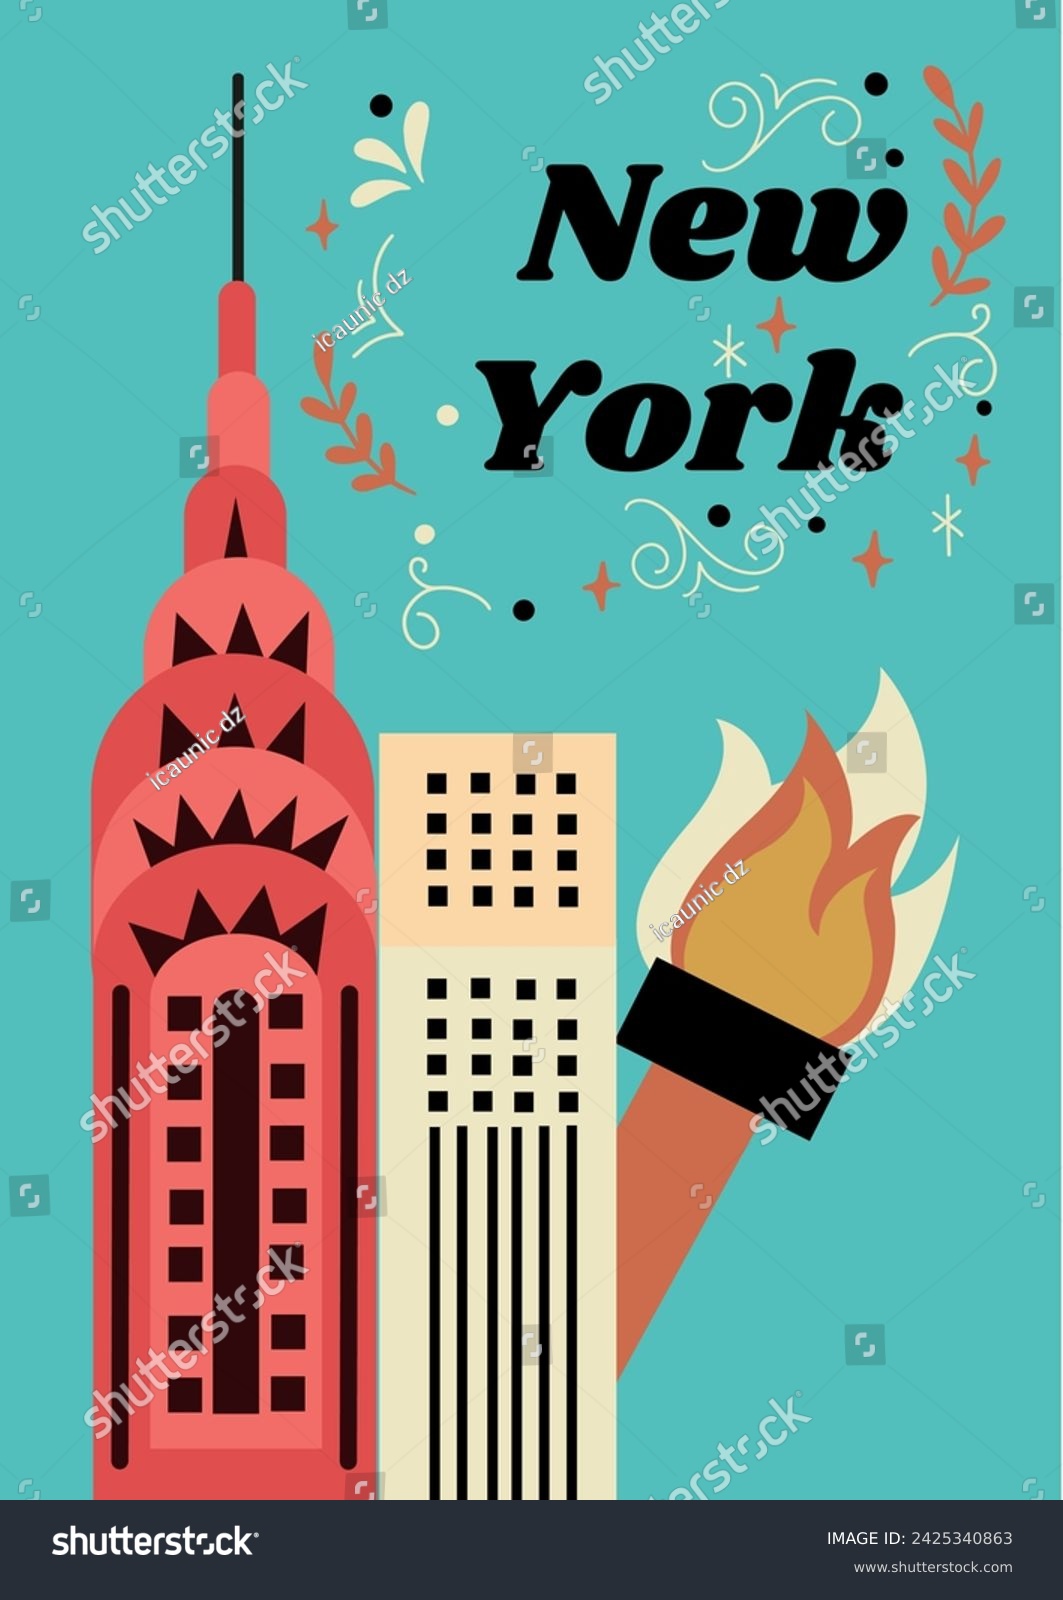 SVG of New York city vector illustration, typography lettering, Chrysler building, Statue of Liberty torch svg